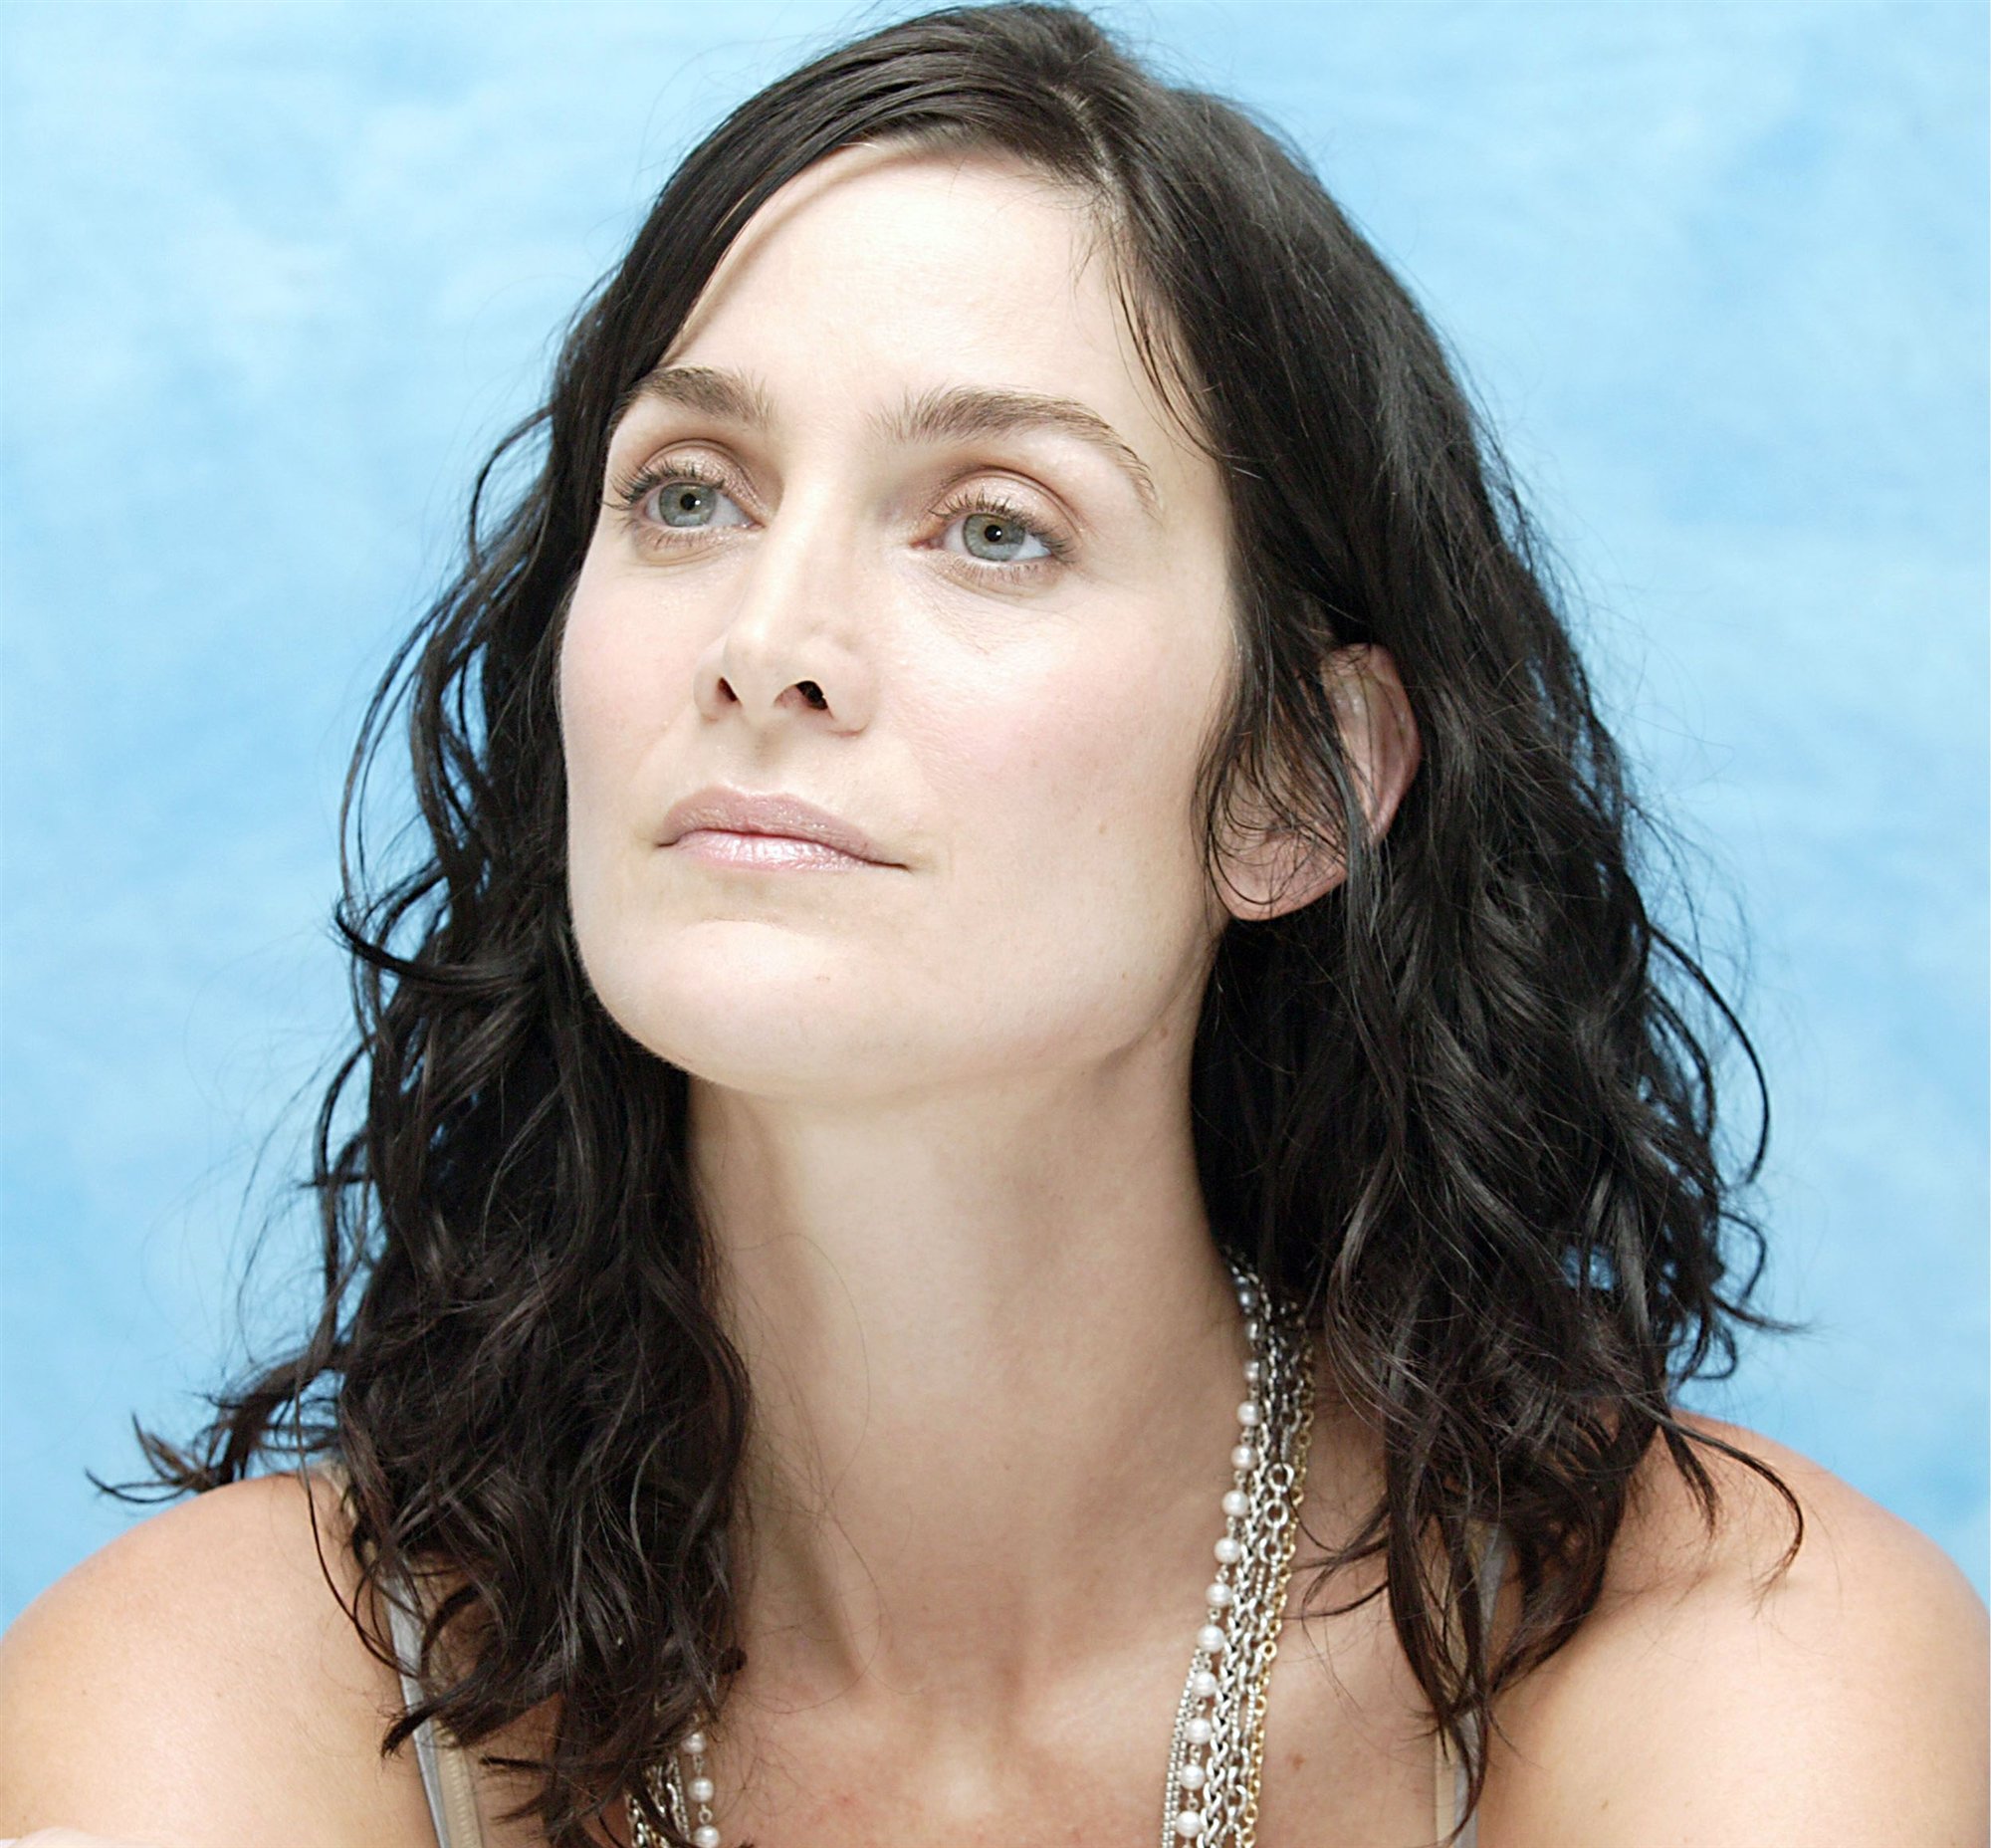 Model Carrie Anne Moss Wallpapers 6449.